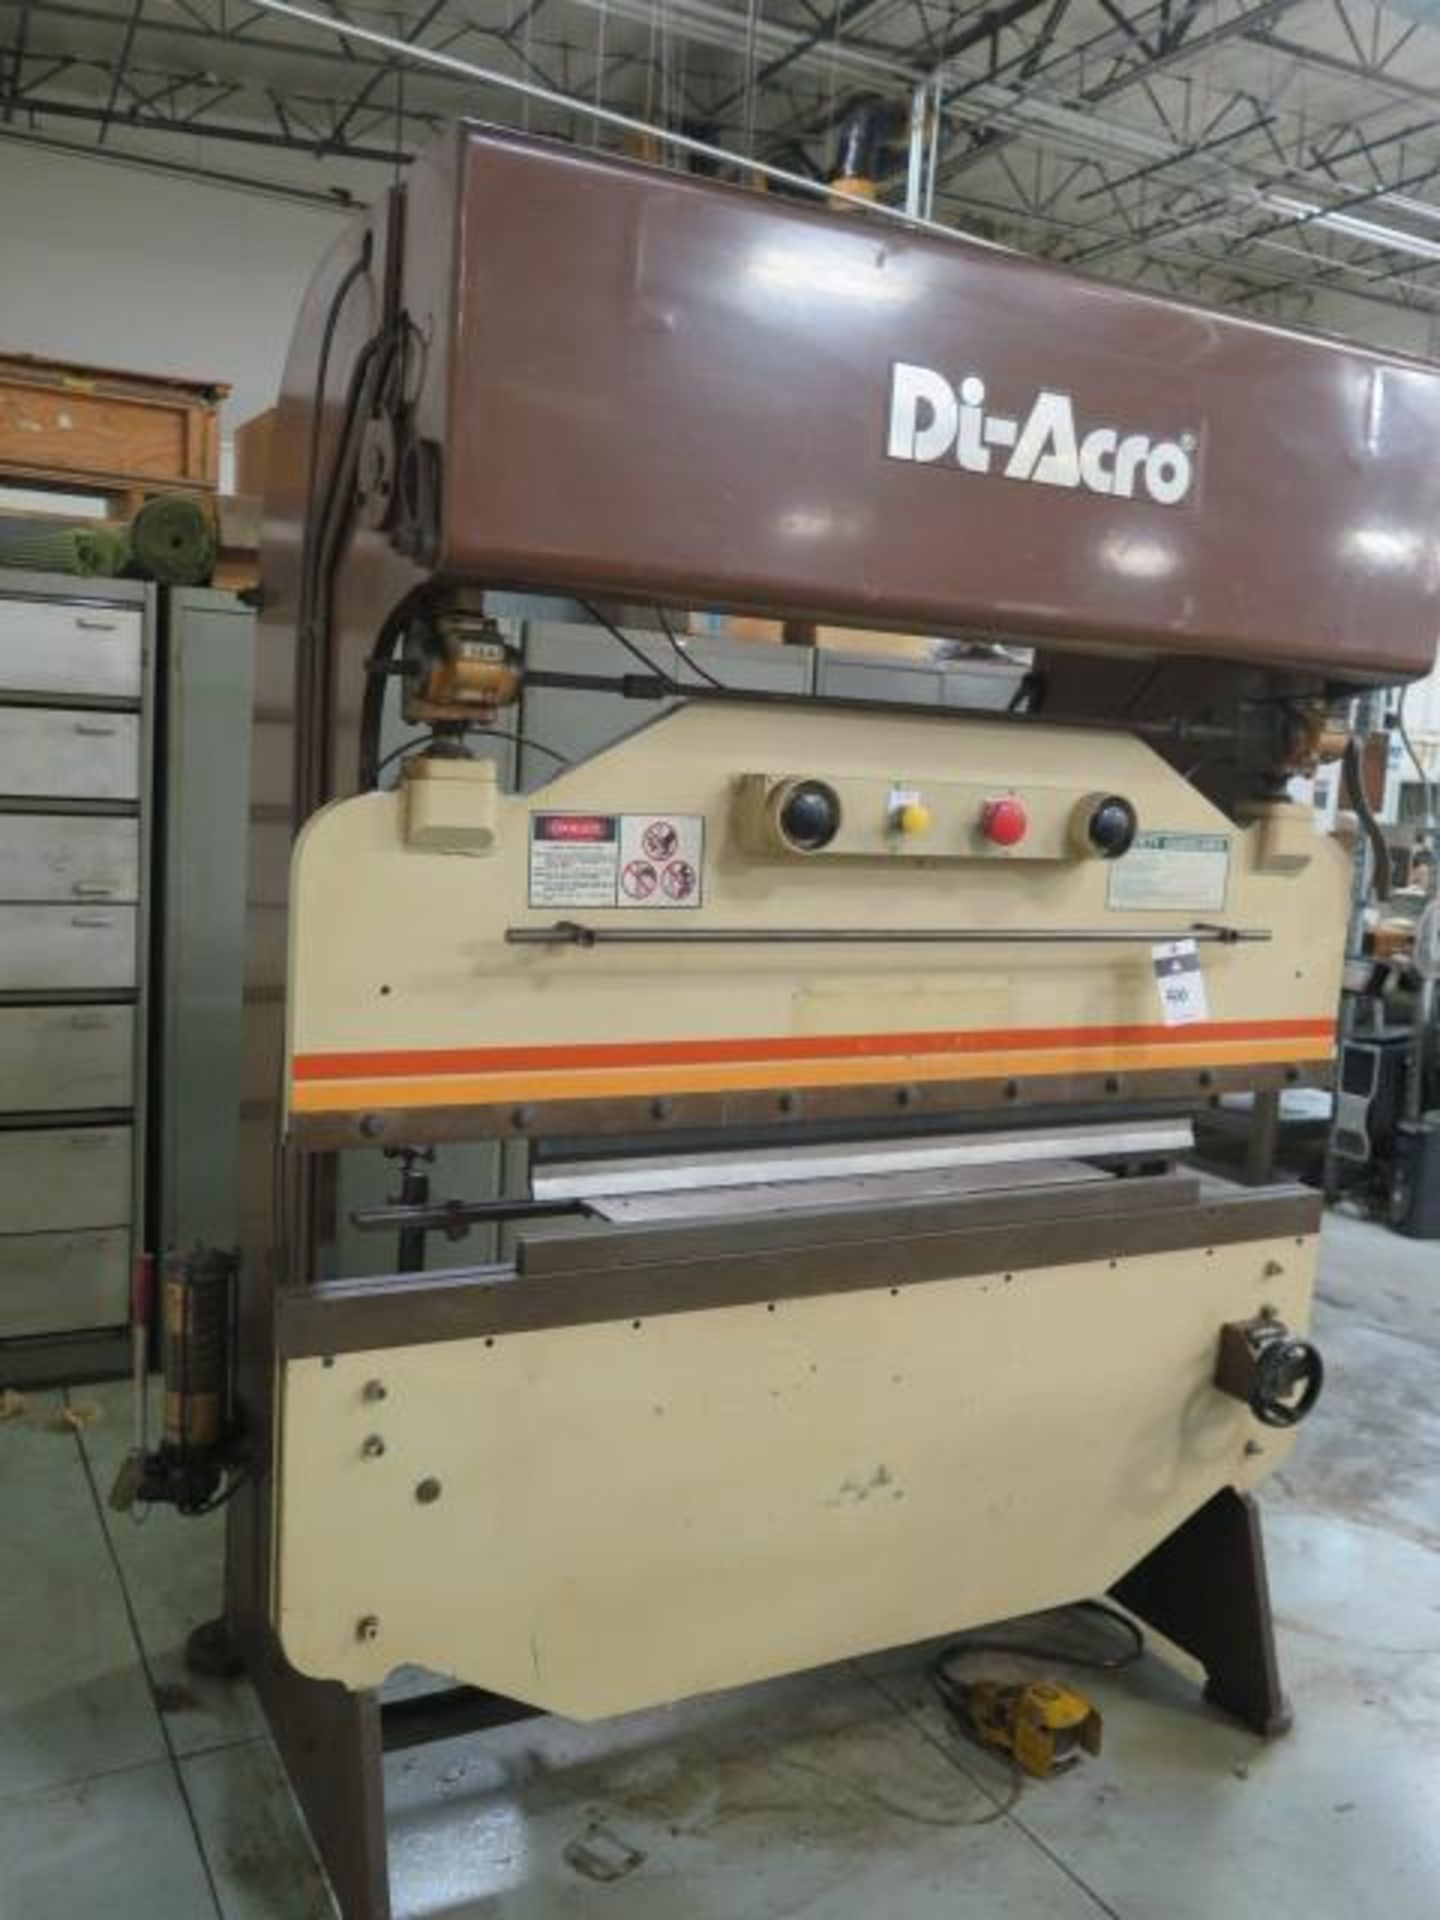 DiAcro 4-7272” Press Brake w/ Dial Back Gage, 72” Length, This Item is Sold AS IS and NO Warranty. - Image 2 of 10